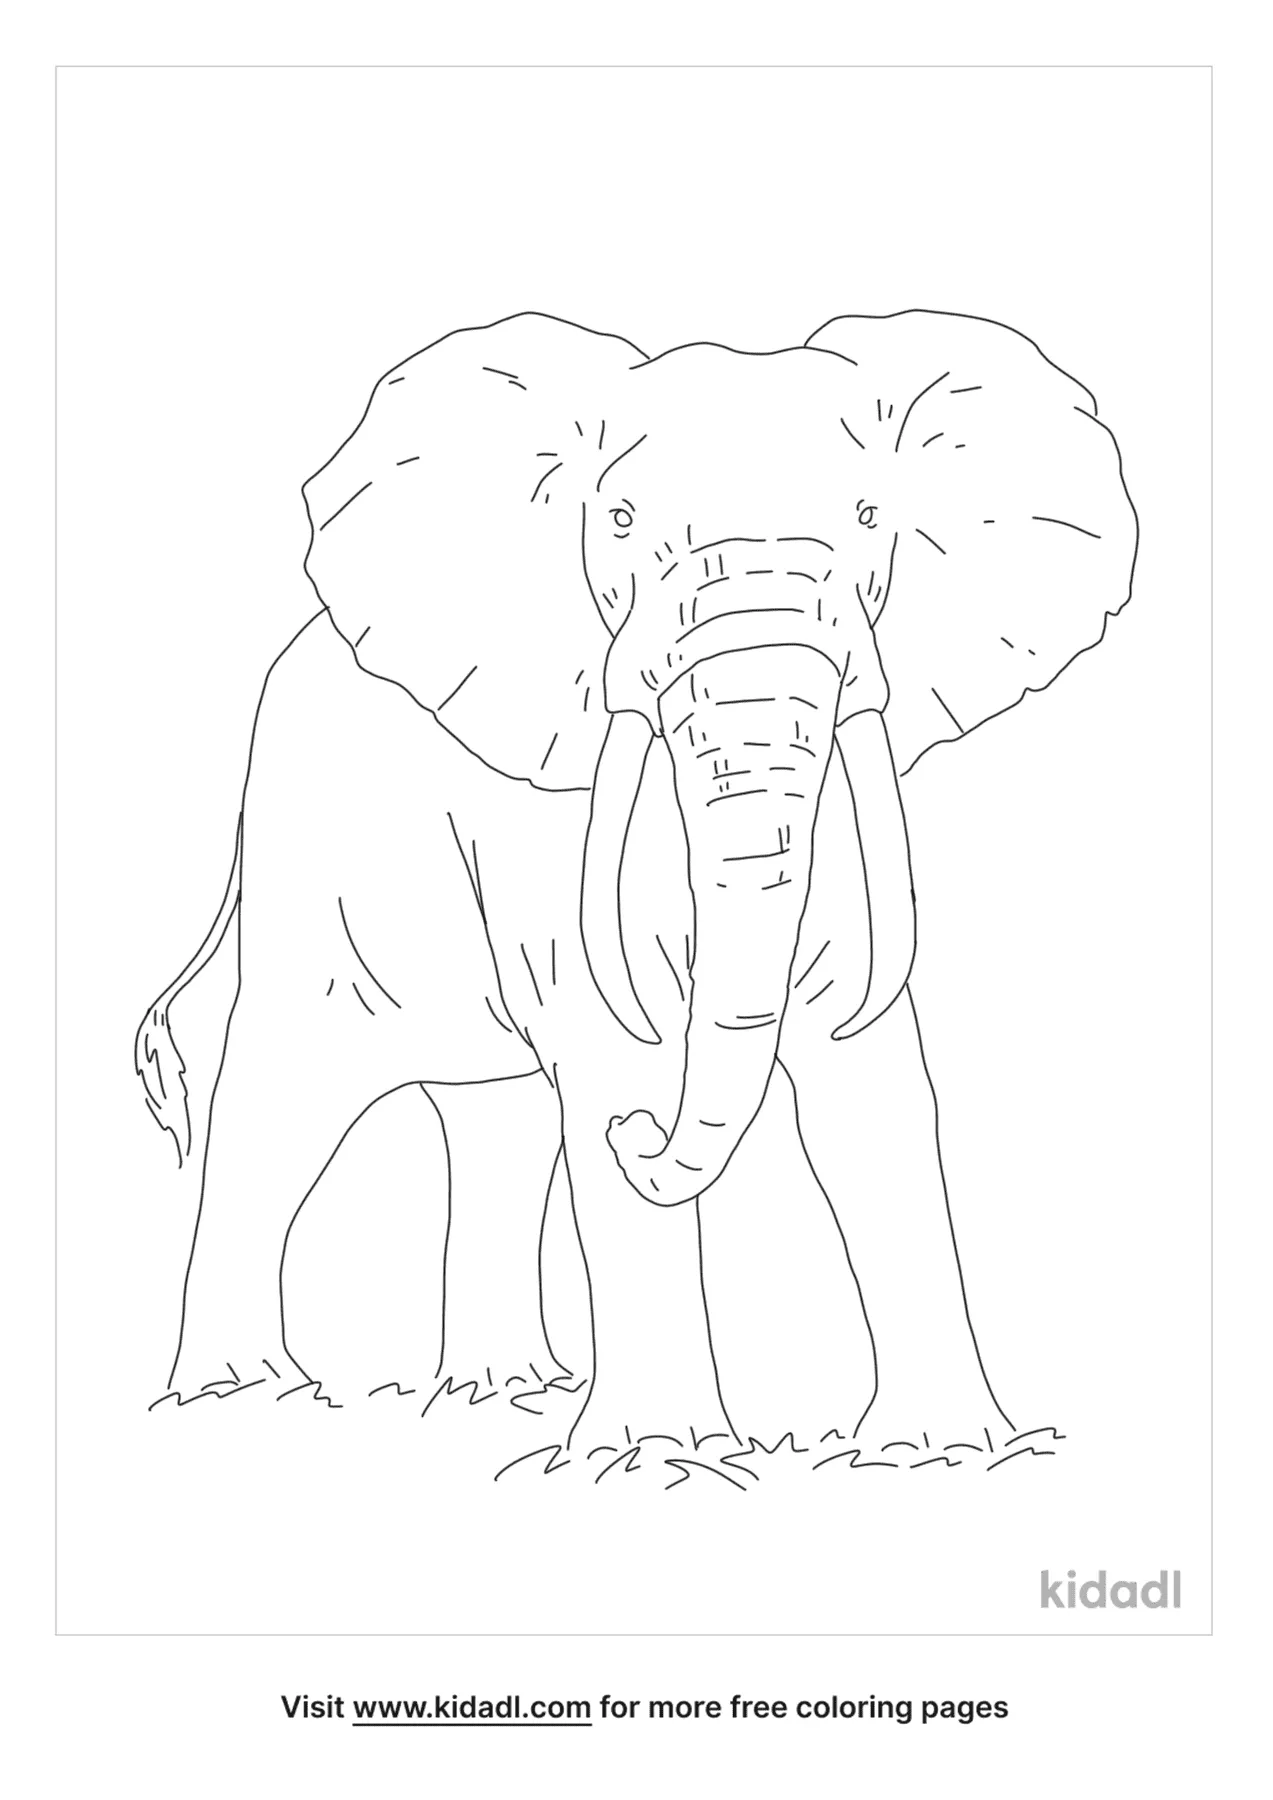 Free Realistic Jungle Animal Coloring Page | Coloring Page Printables |  Kidadl